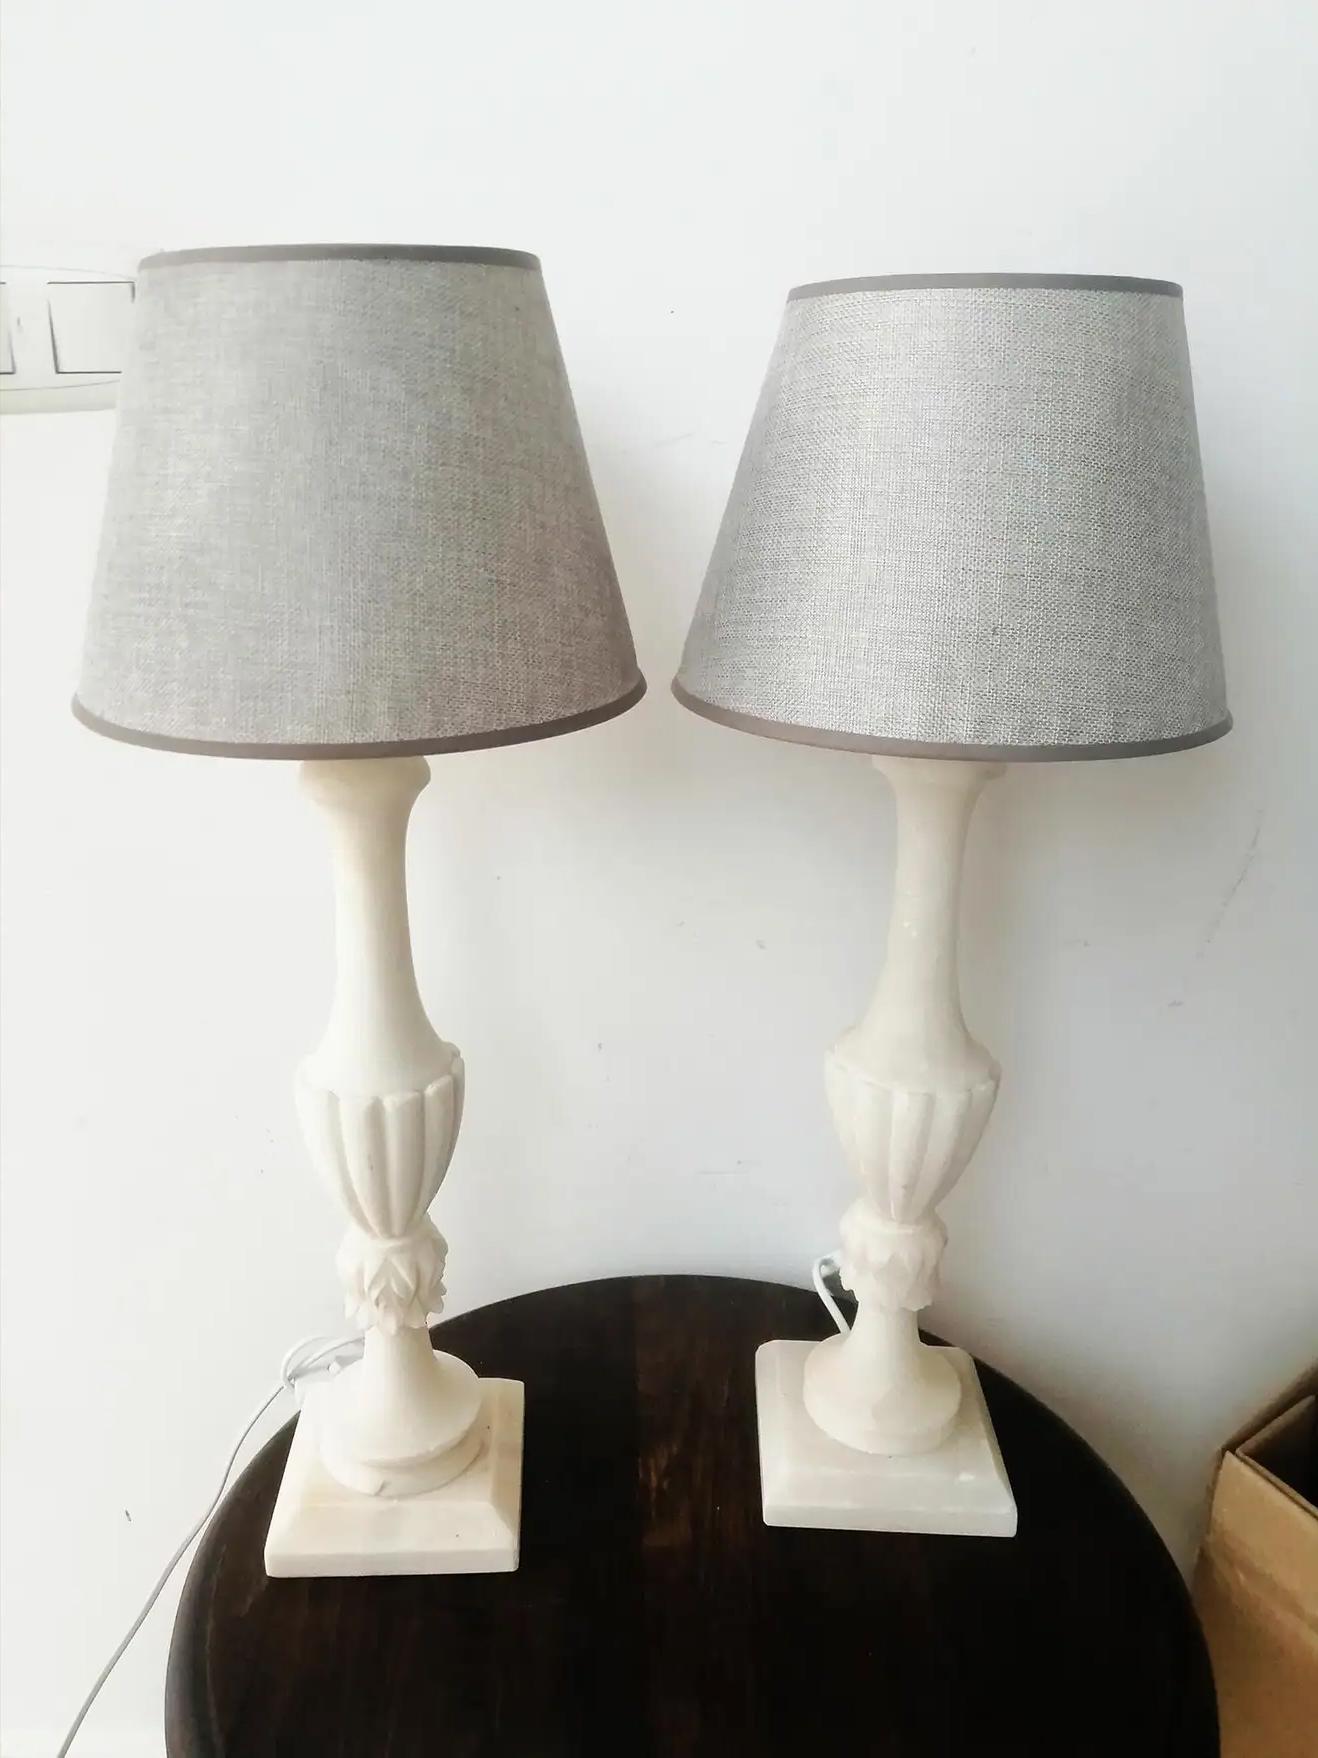  Extra Large Alabaster or Mrble Table Lamps  White Color 57 cm (without screens) For Sale 9